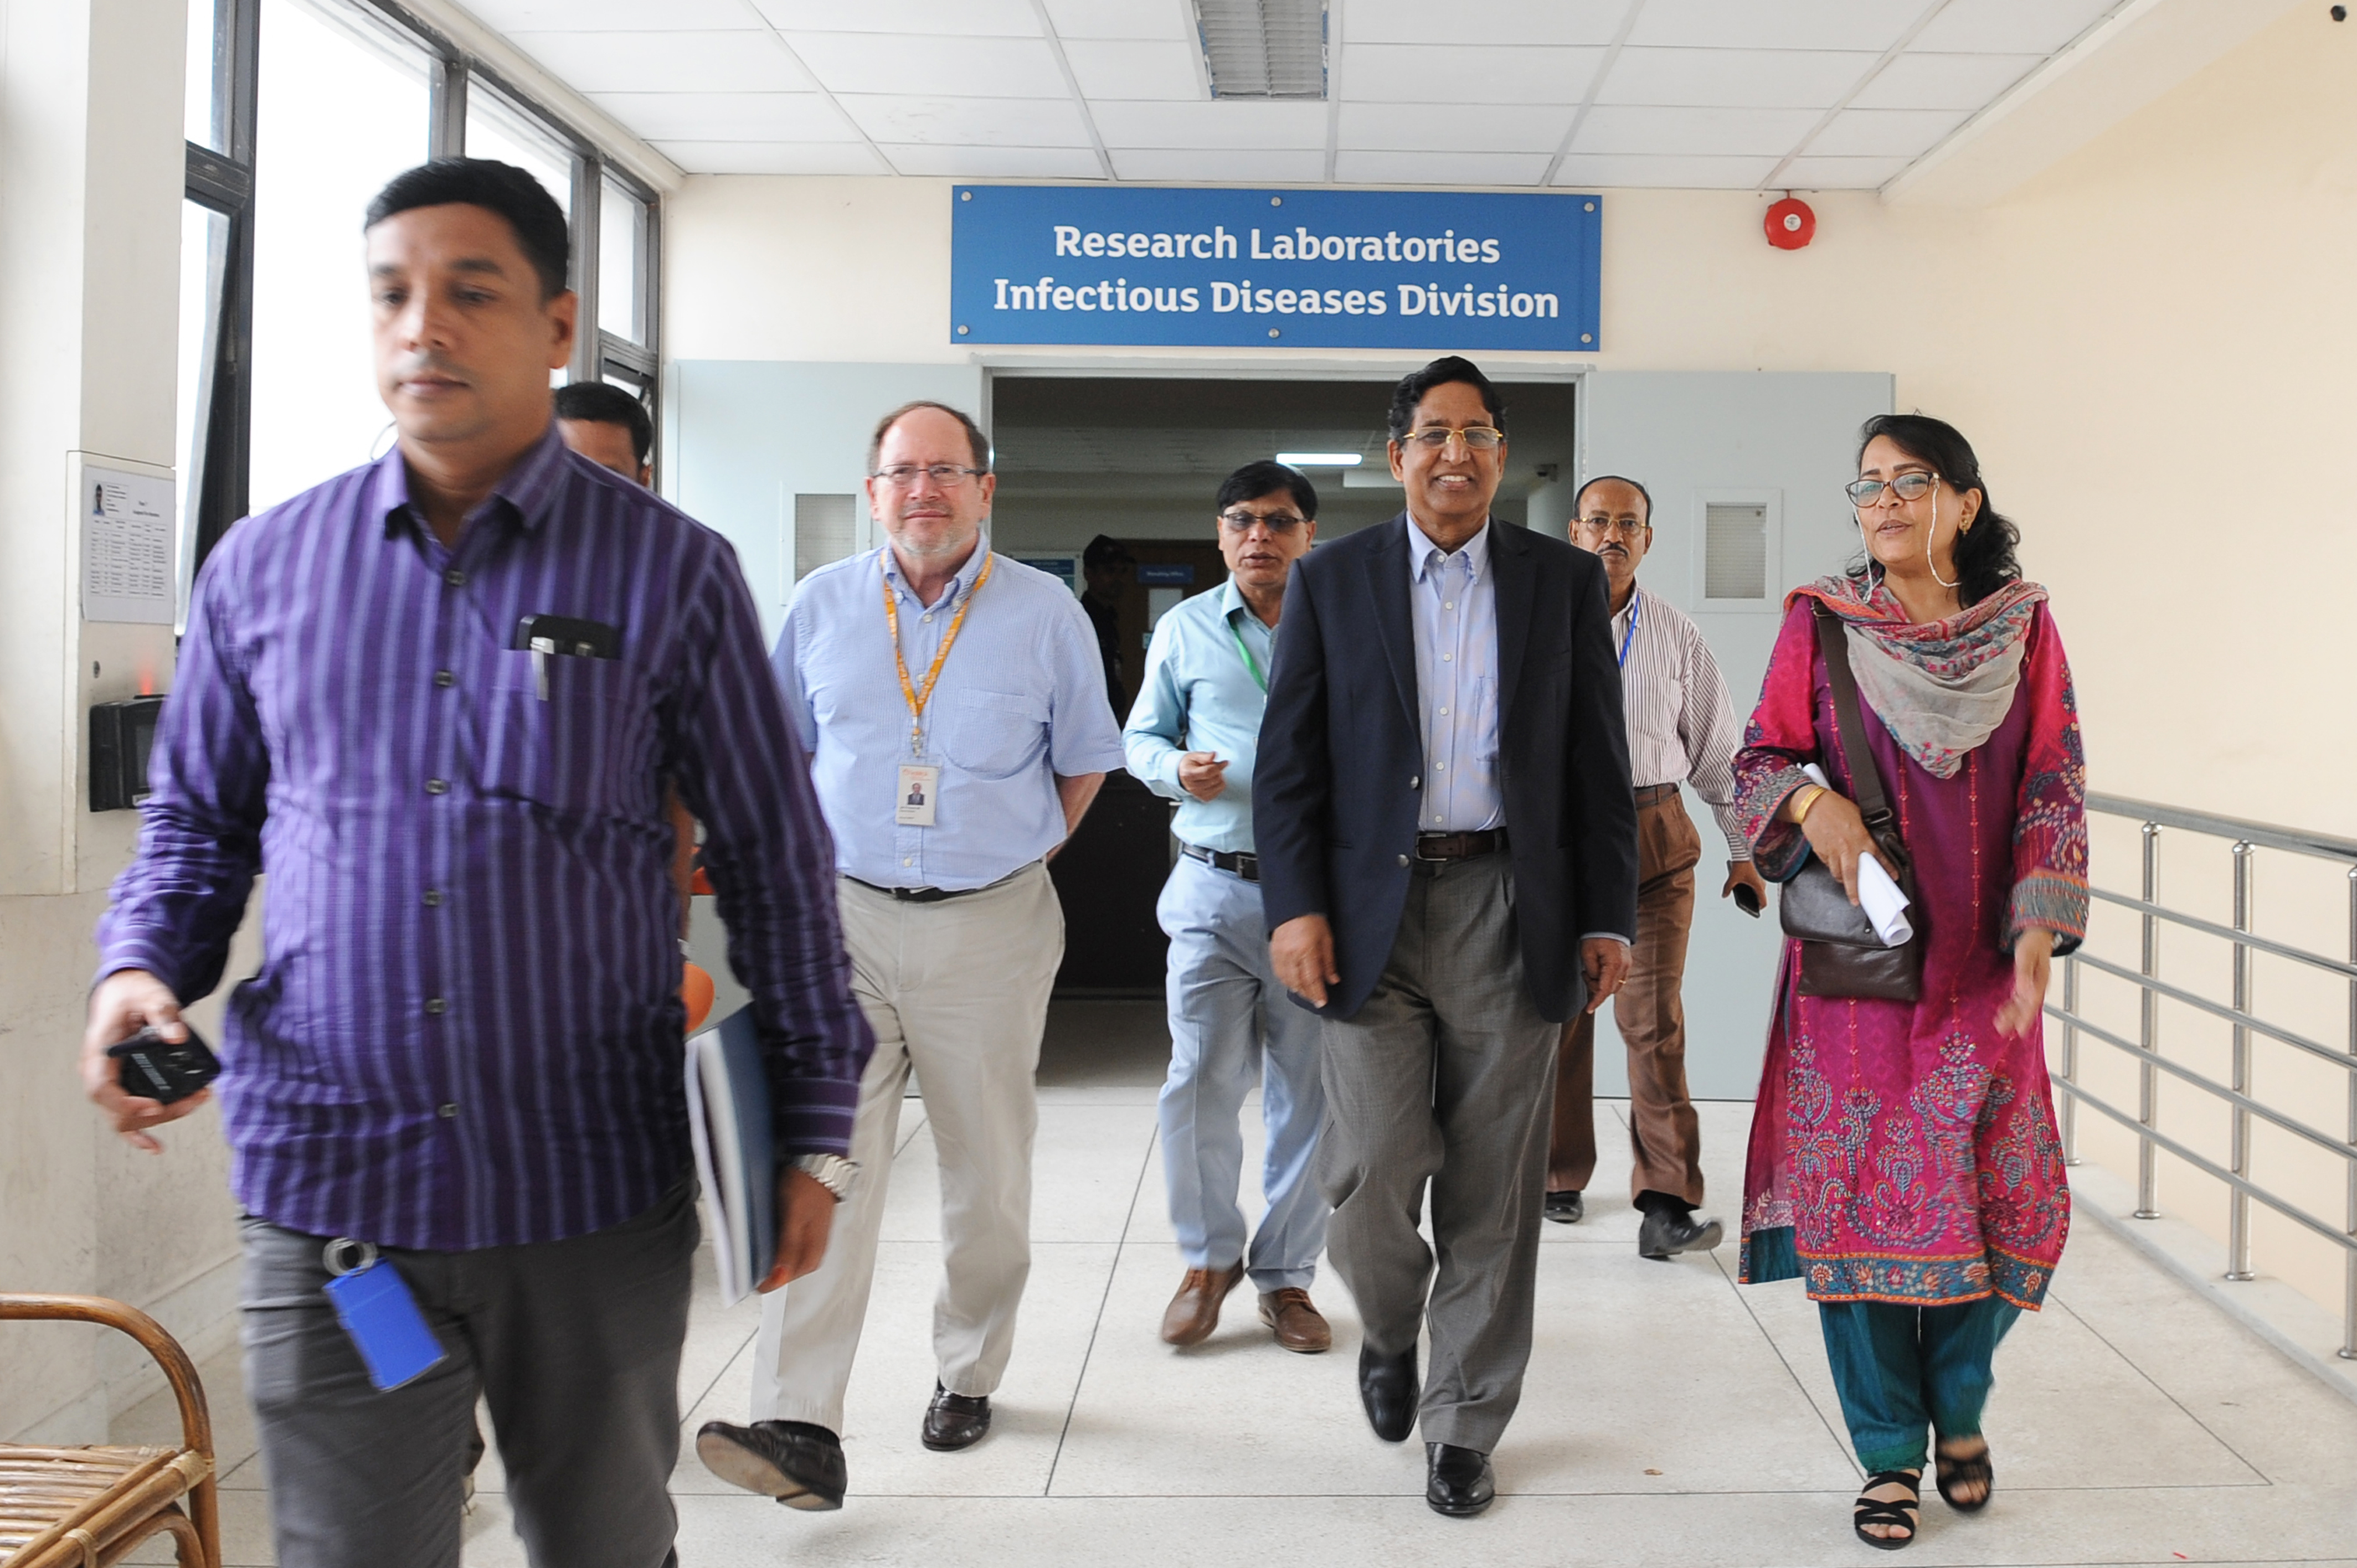 Rubhana walking with a group of male scientists and Bangladesh Agriculture Minister